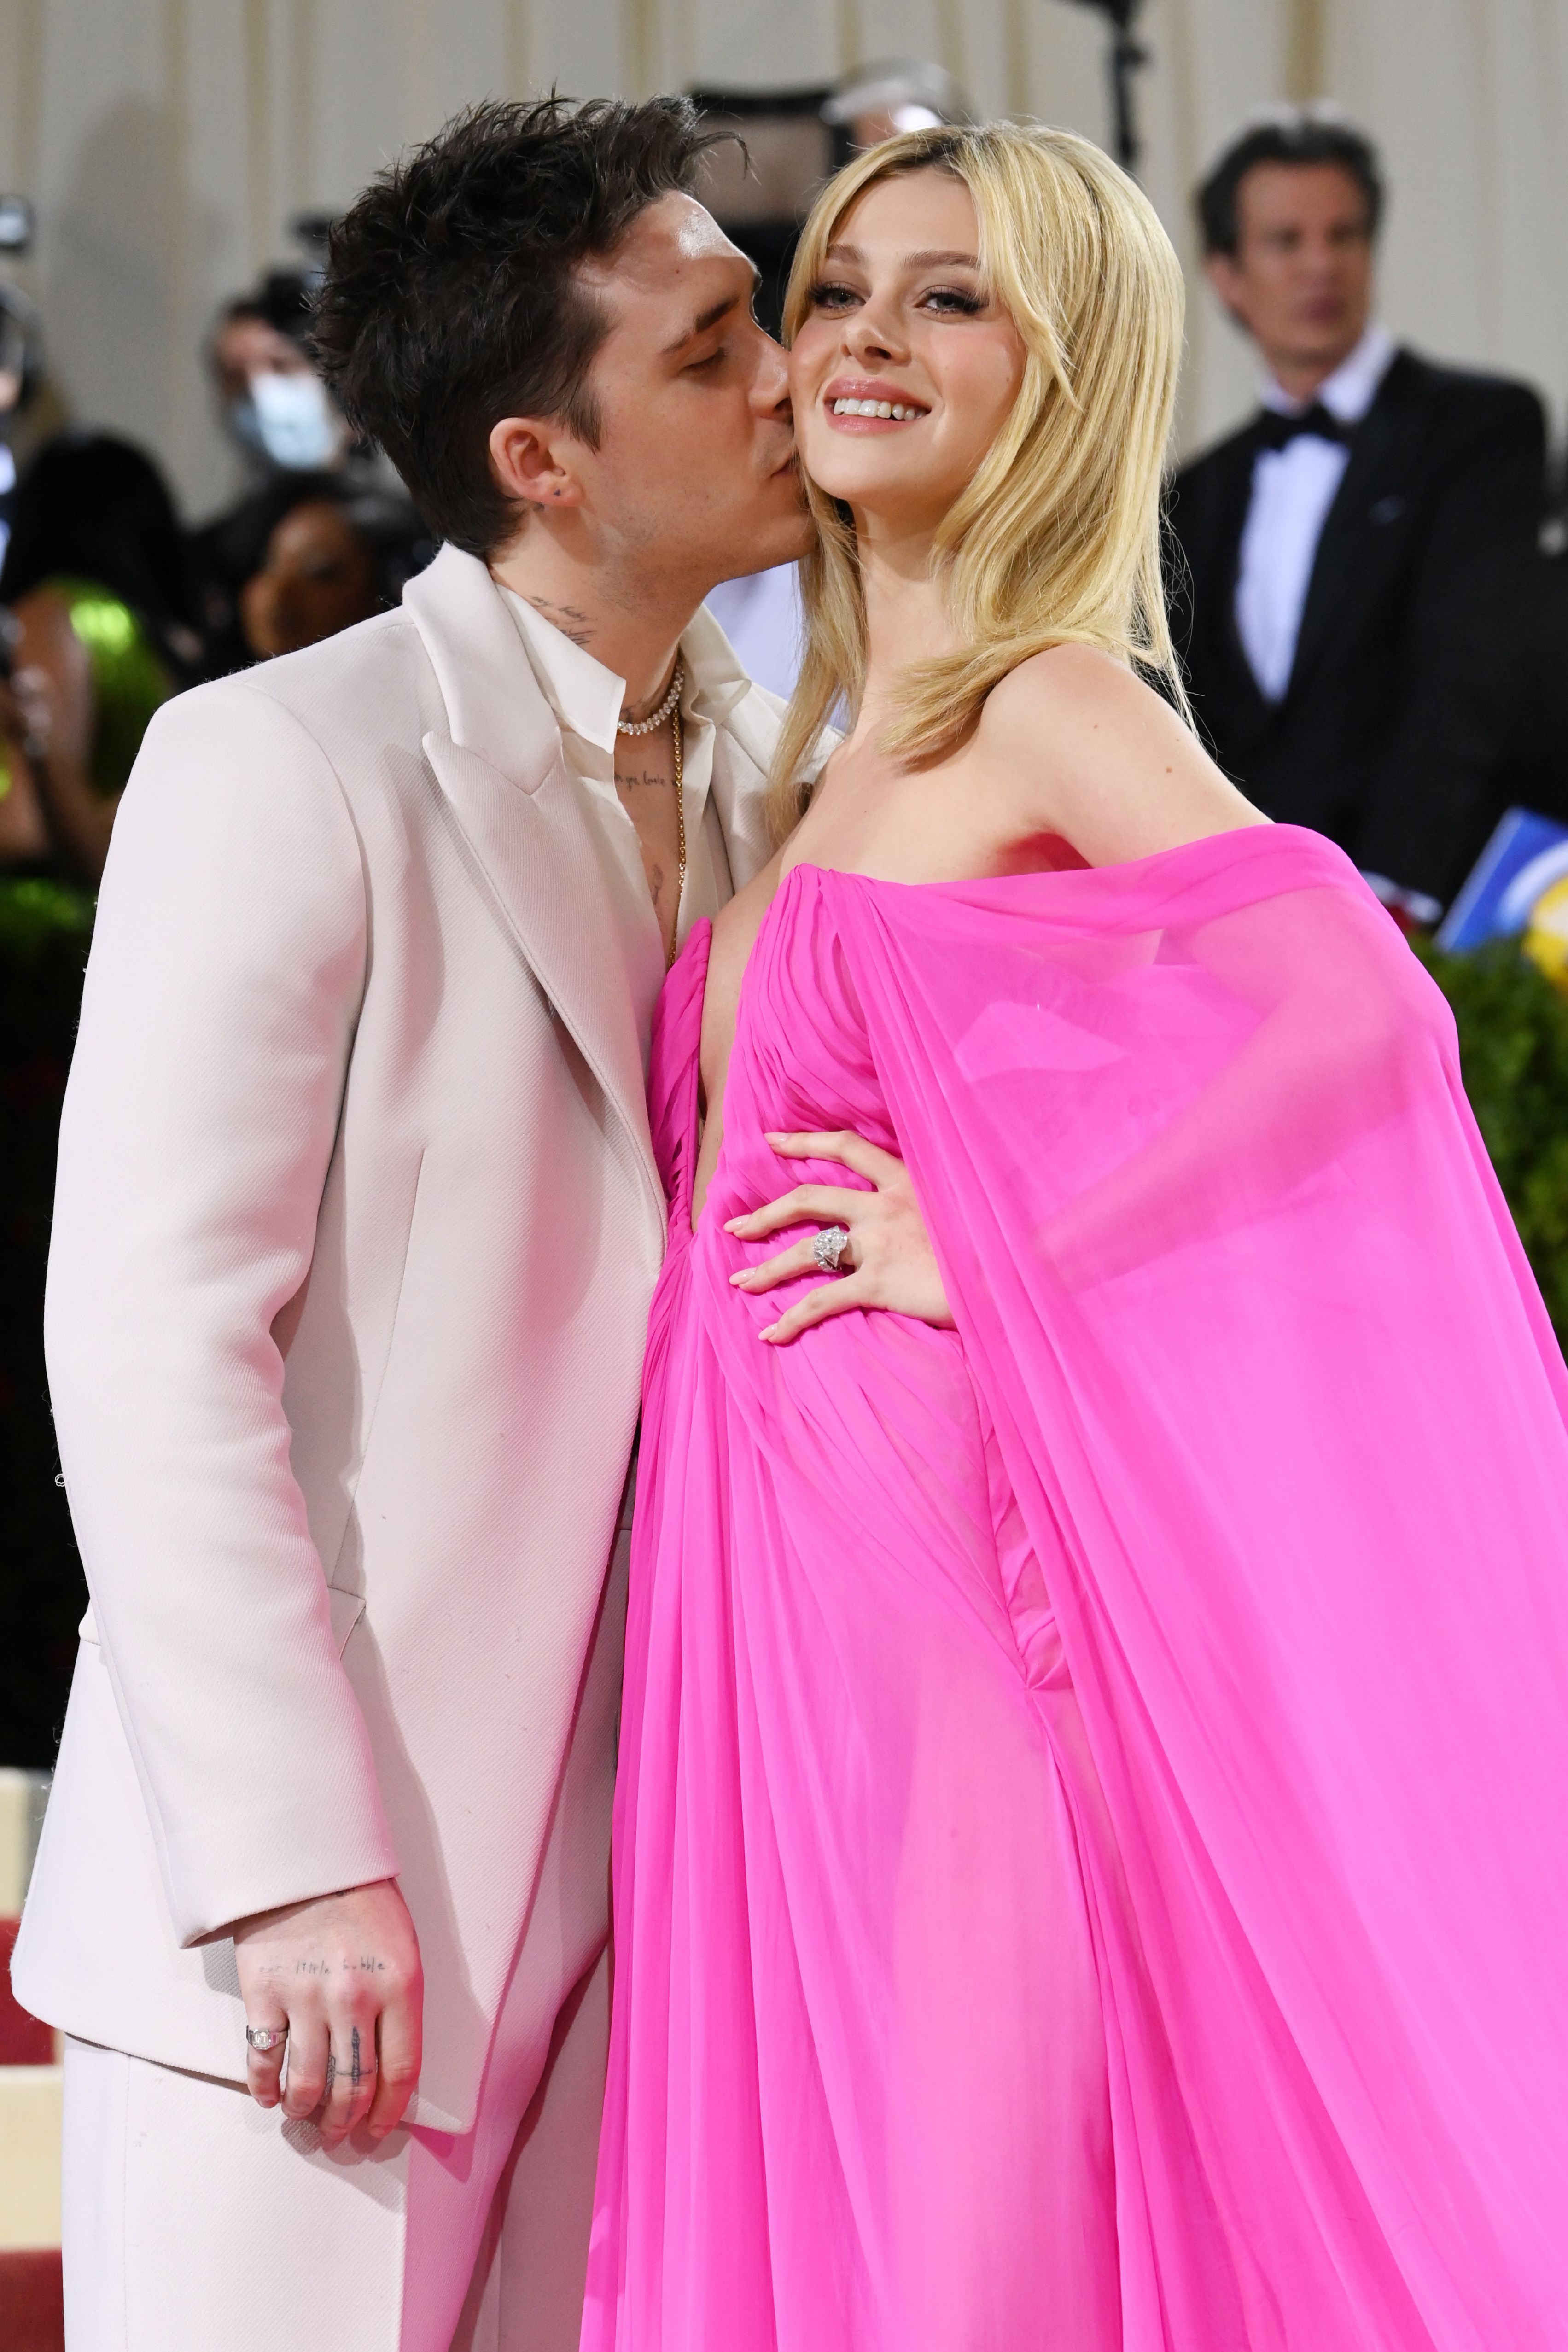 Celeb Couples Who Turned the 2022 Met Gala Into the Ultimate Date